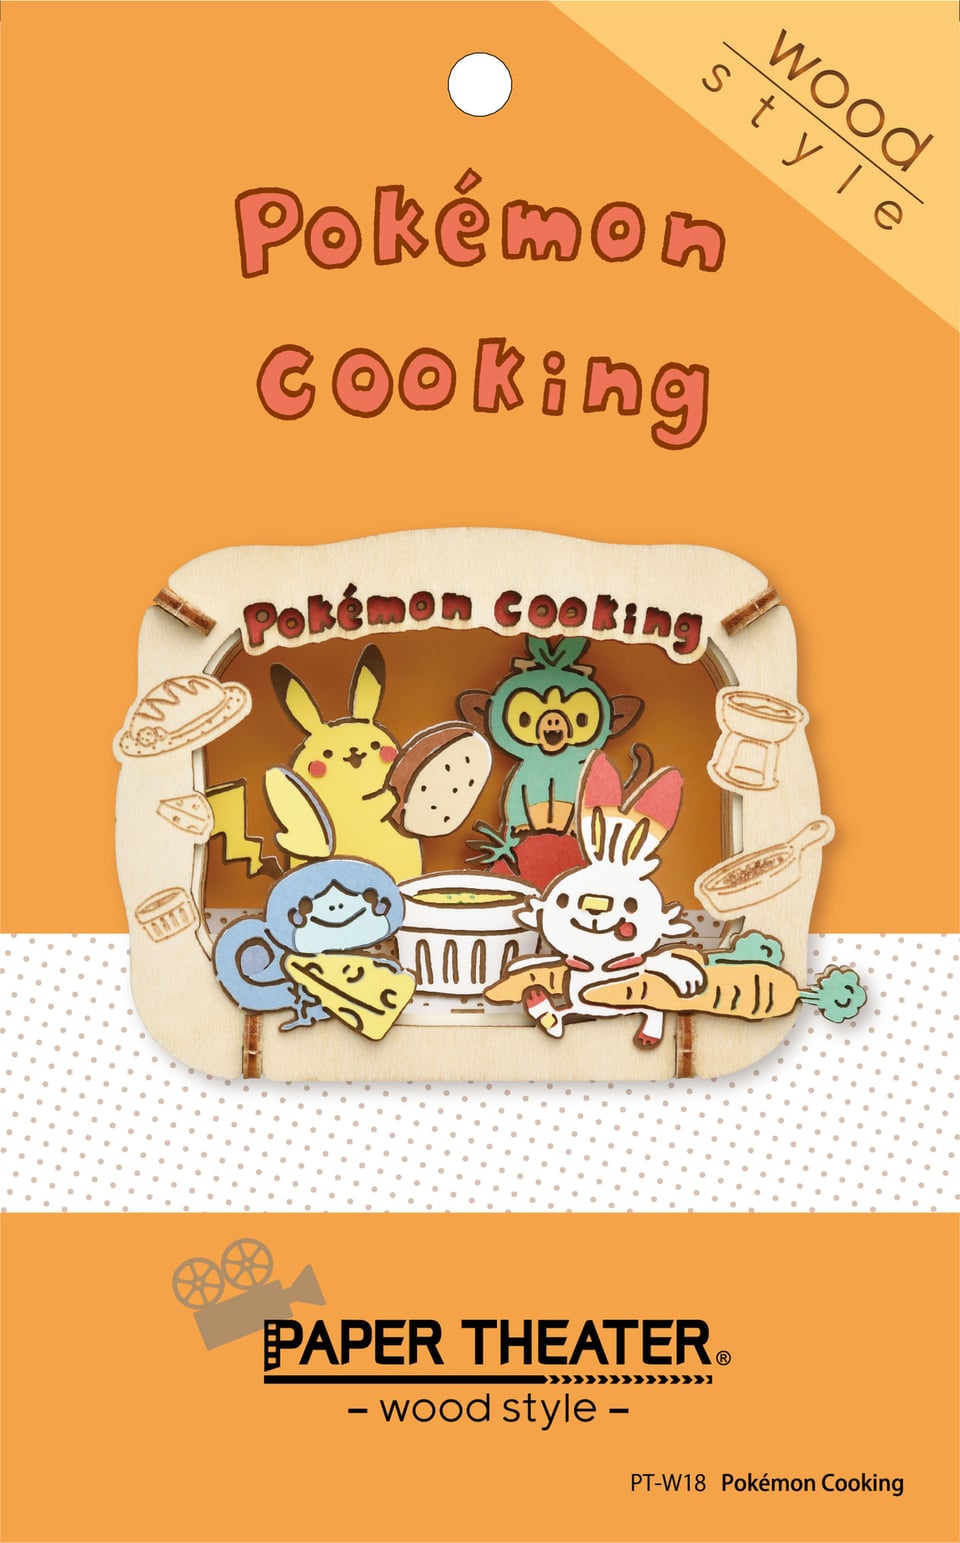 ENS-PT-W18 Pokemon Cooking (ポケモン)  ペーパーシアター エンスカイ  雑貨 PAPER THEATER ペーパー シアター ギフト 誕生日 プレゼント 誕生日プレゼント クラフト ホビー